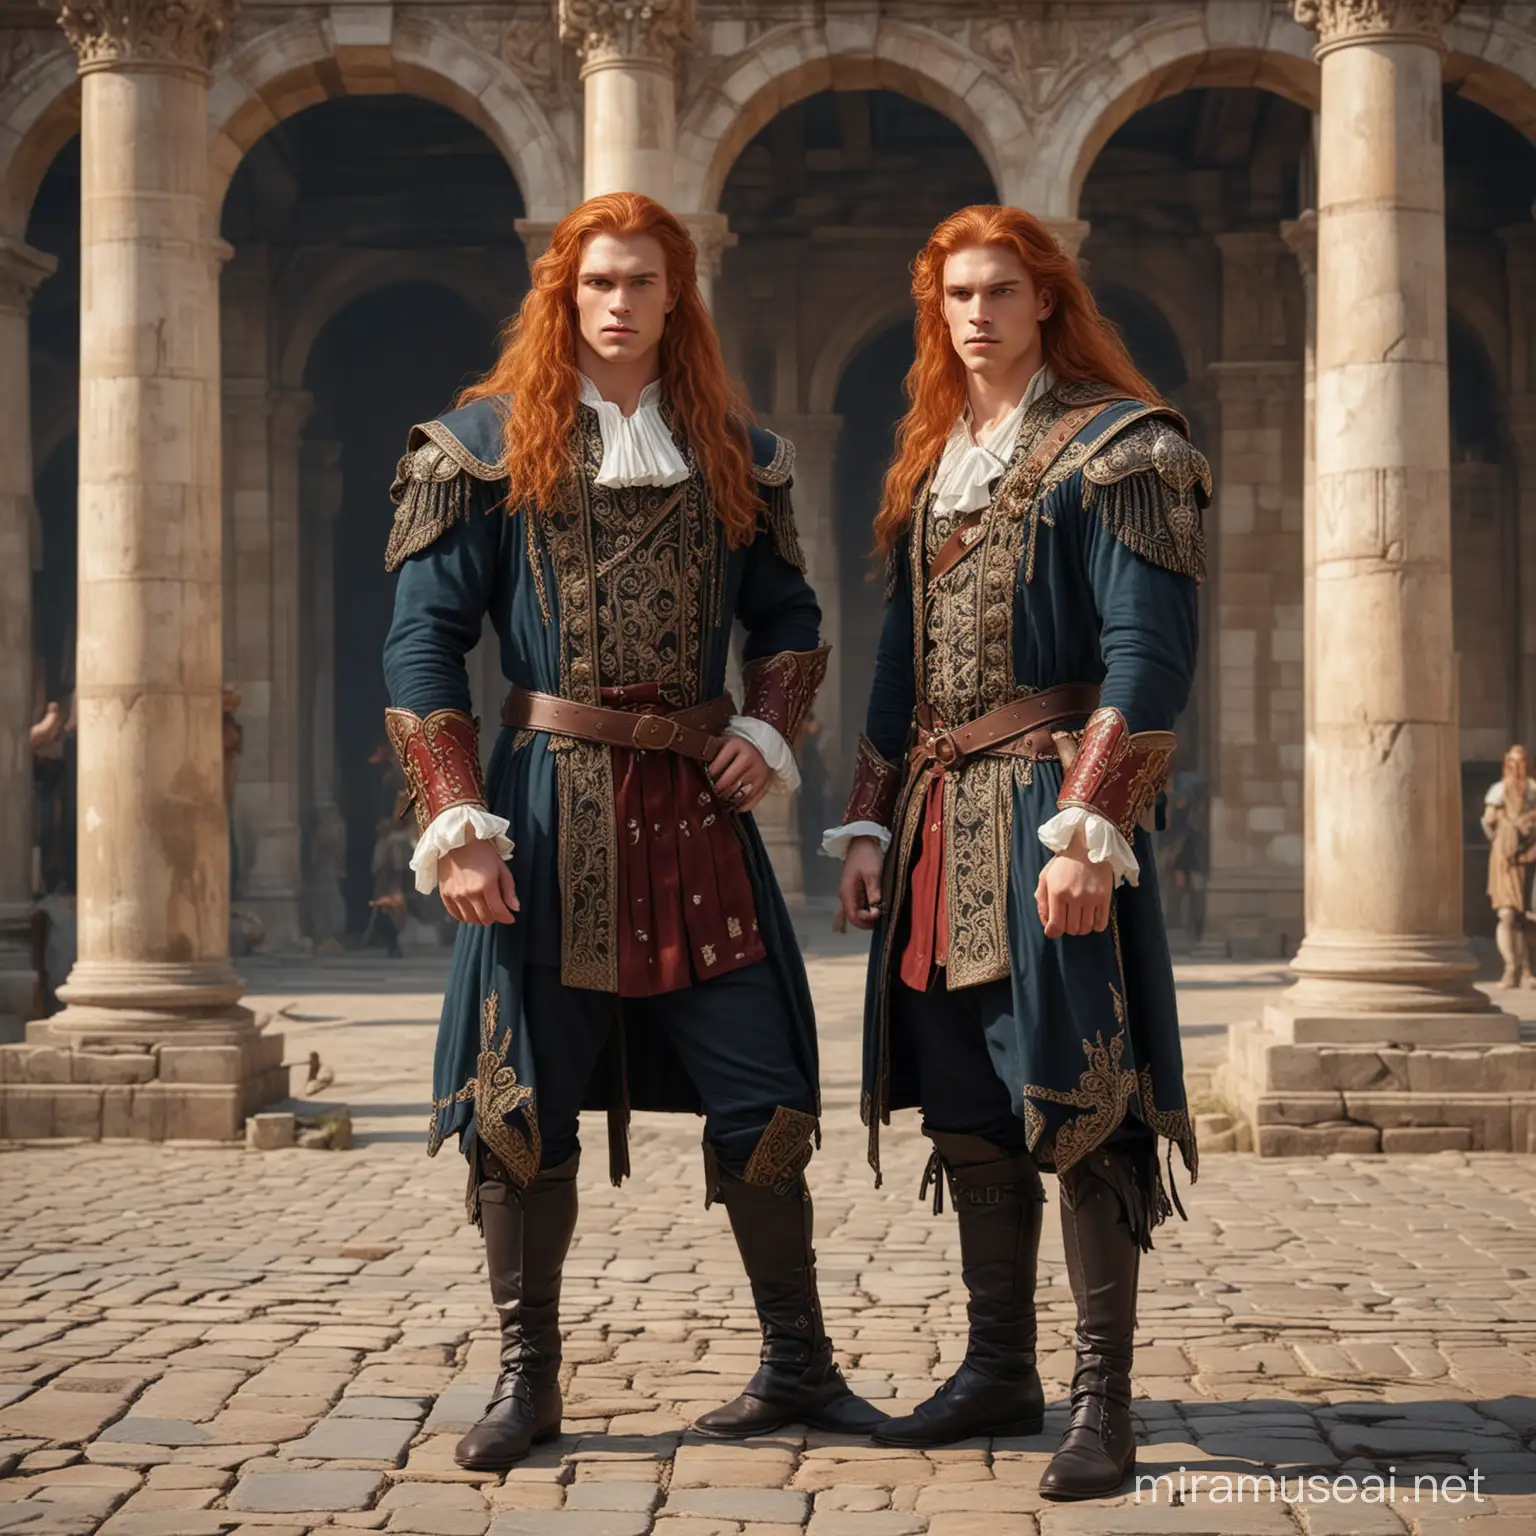 RedHaired Twin Brothers in Renaissance Aristocratic Attire Against Ancient Wealthy City Backdrop